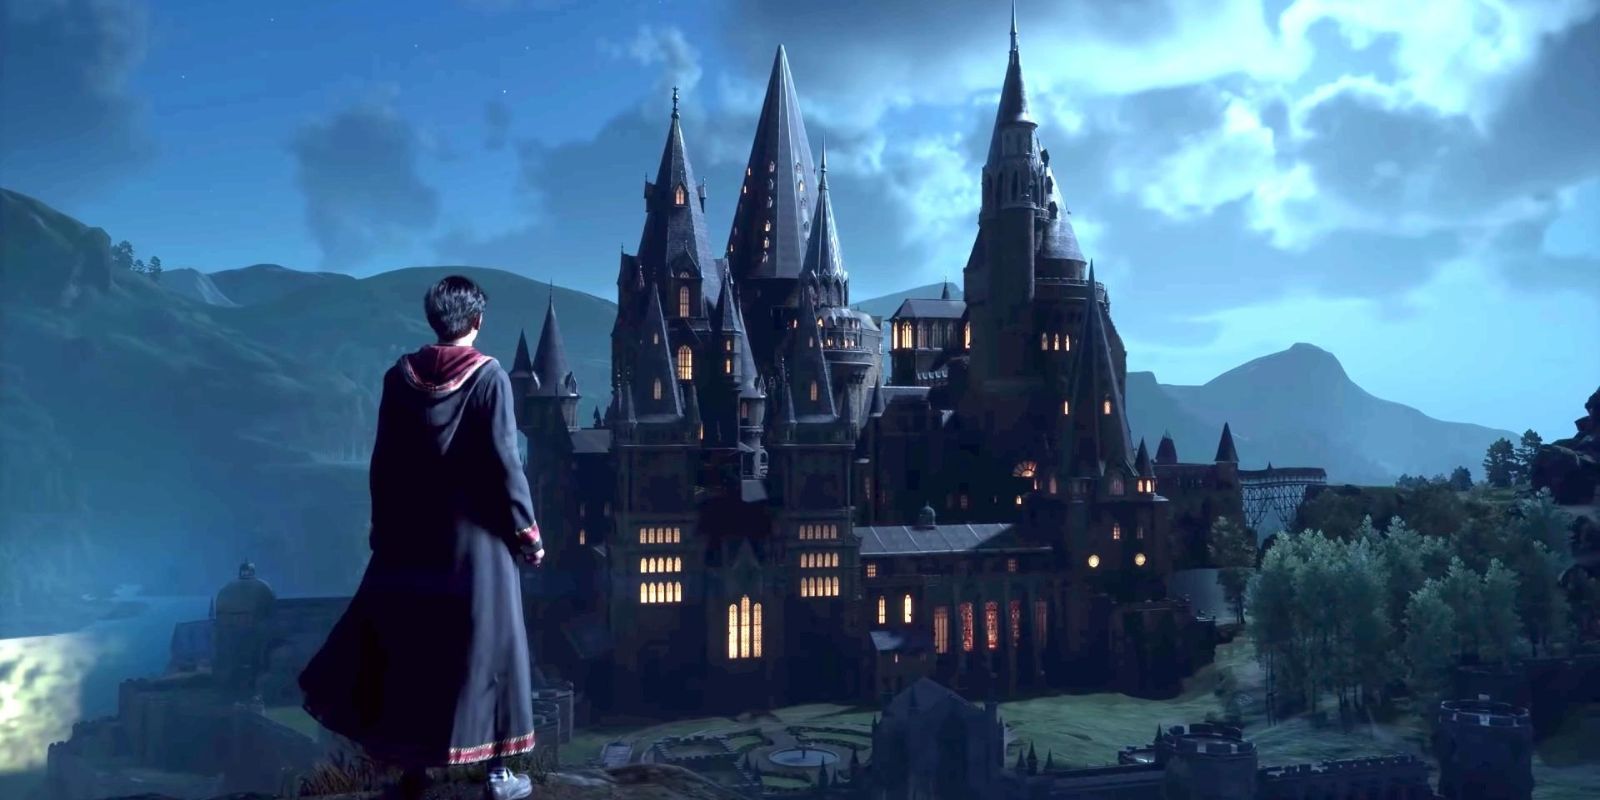 A student stands on a peak and gazes over Hogwarts